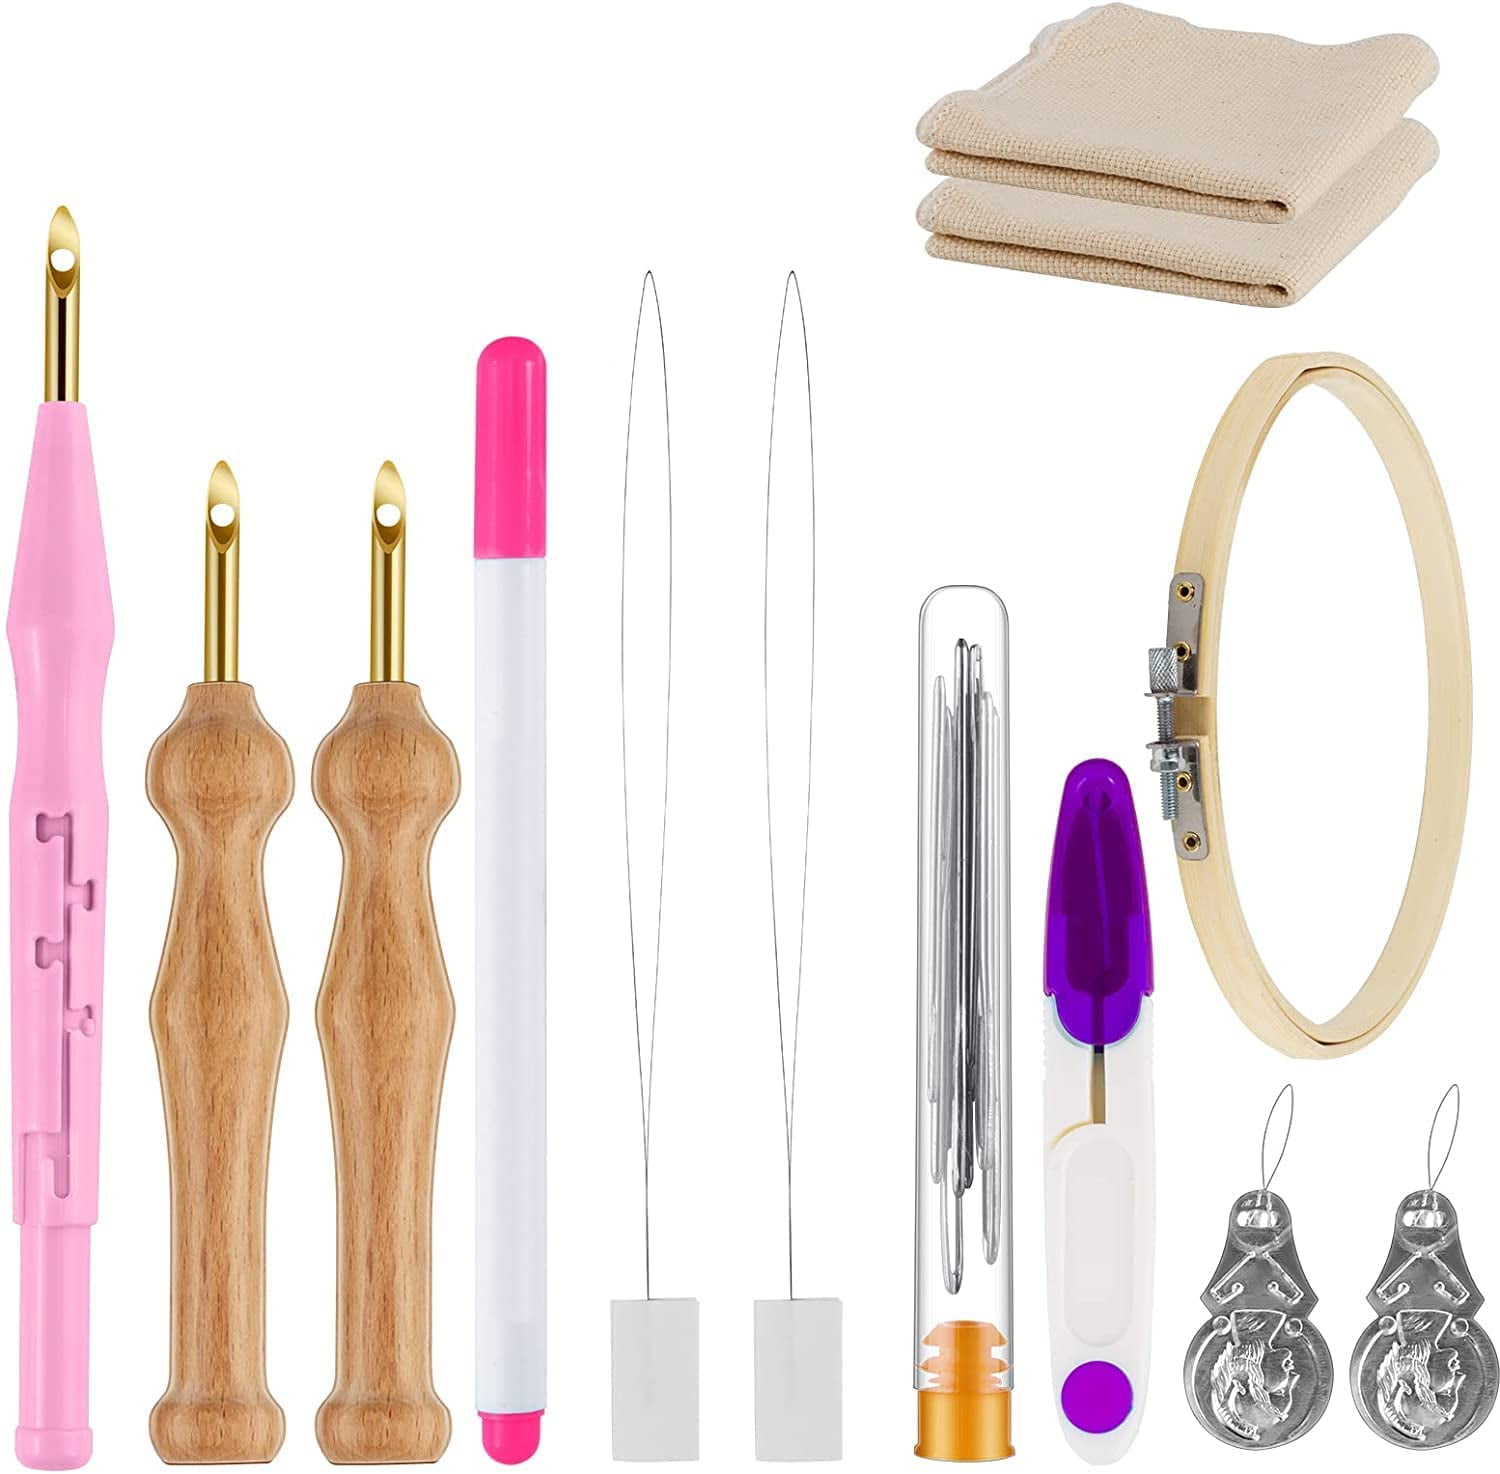 35 Pcs Punch Needle Kit, Punch Needle Tool Adjustable Punch Needle  Embroidery Kits Include Wooden Handle Embroidery Pen Set, Big Eye Needles,  Punch